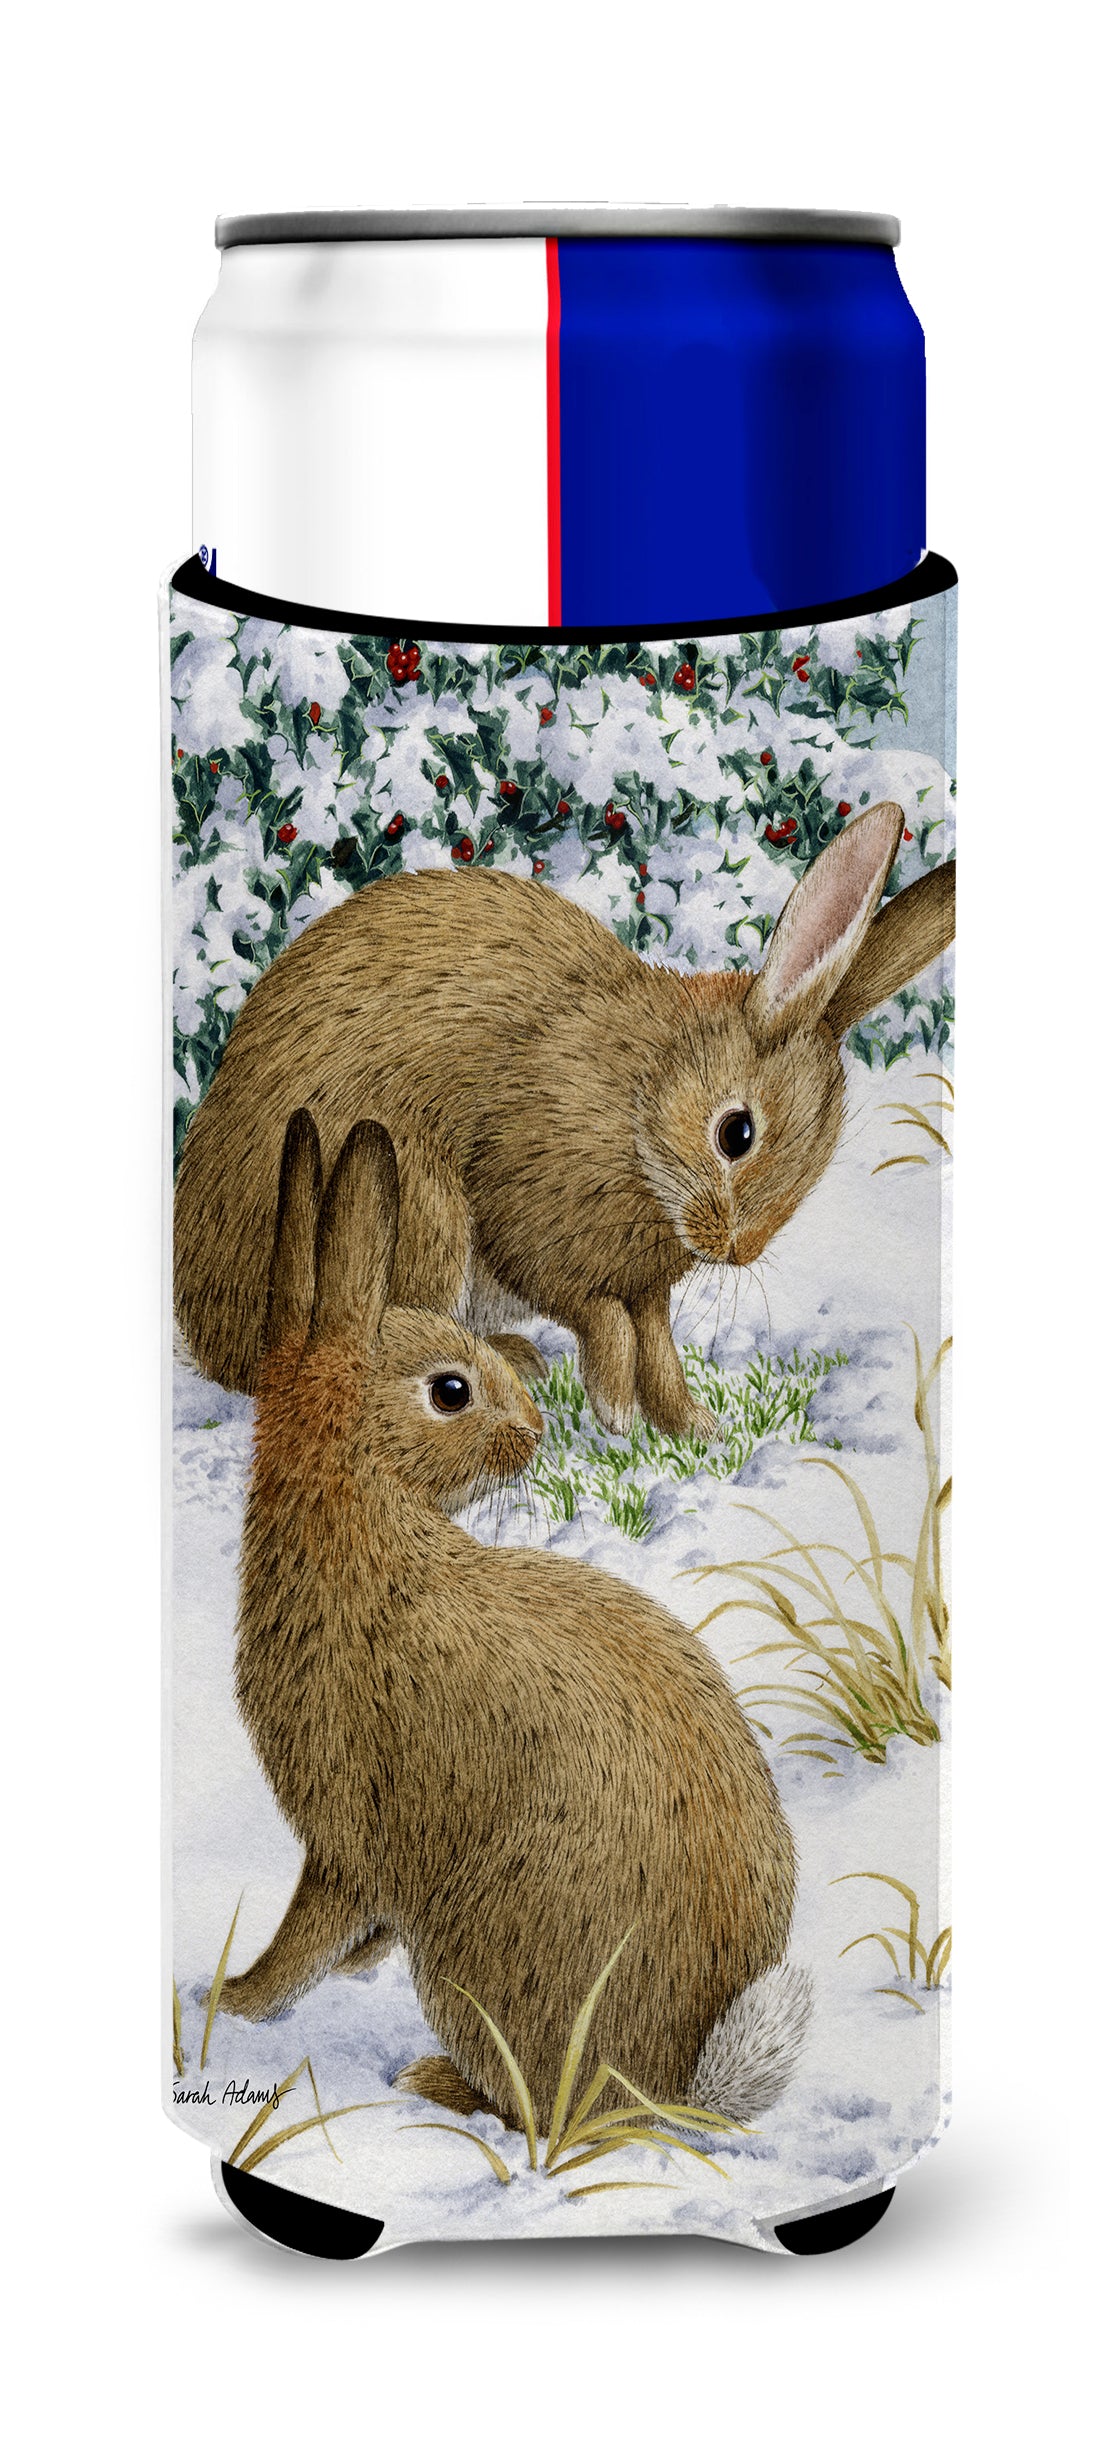 Rabbit searching for Grass in the Snow Ultra Beverage Insulators for slim cans ASA2036MUK